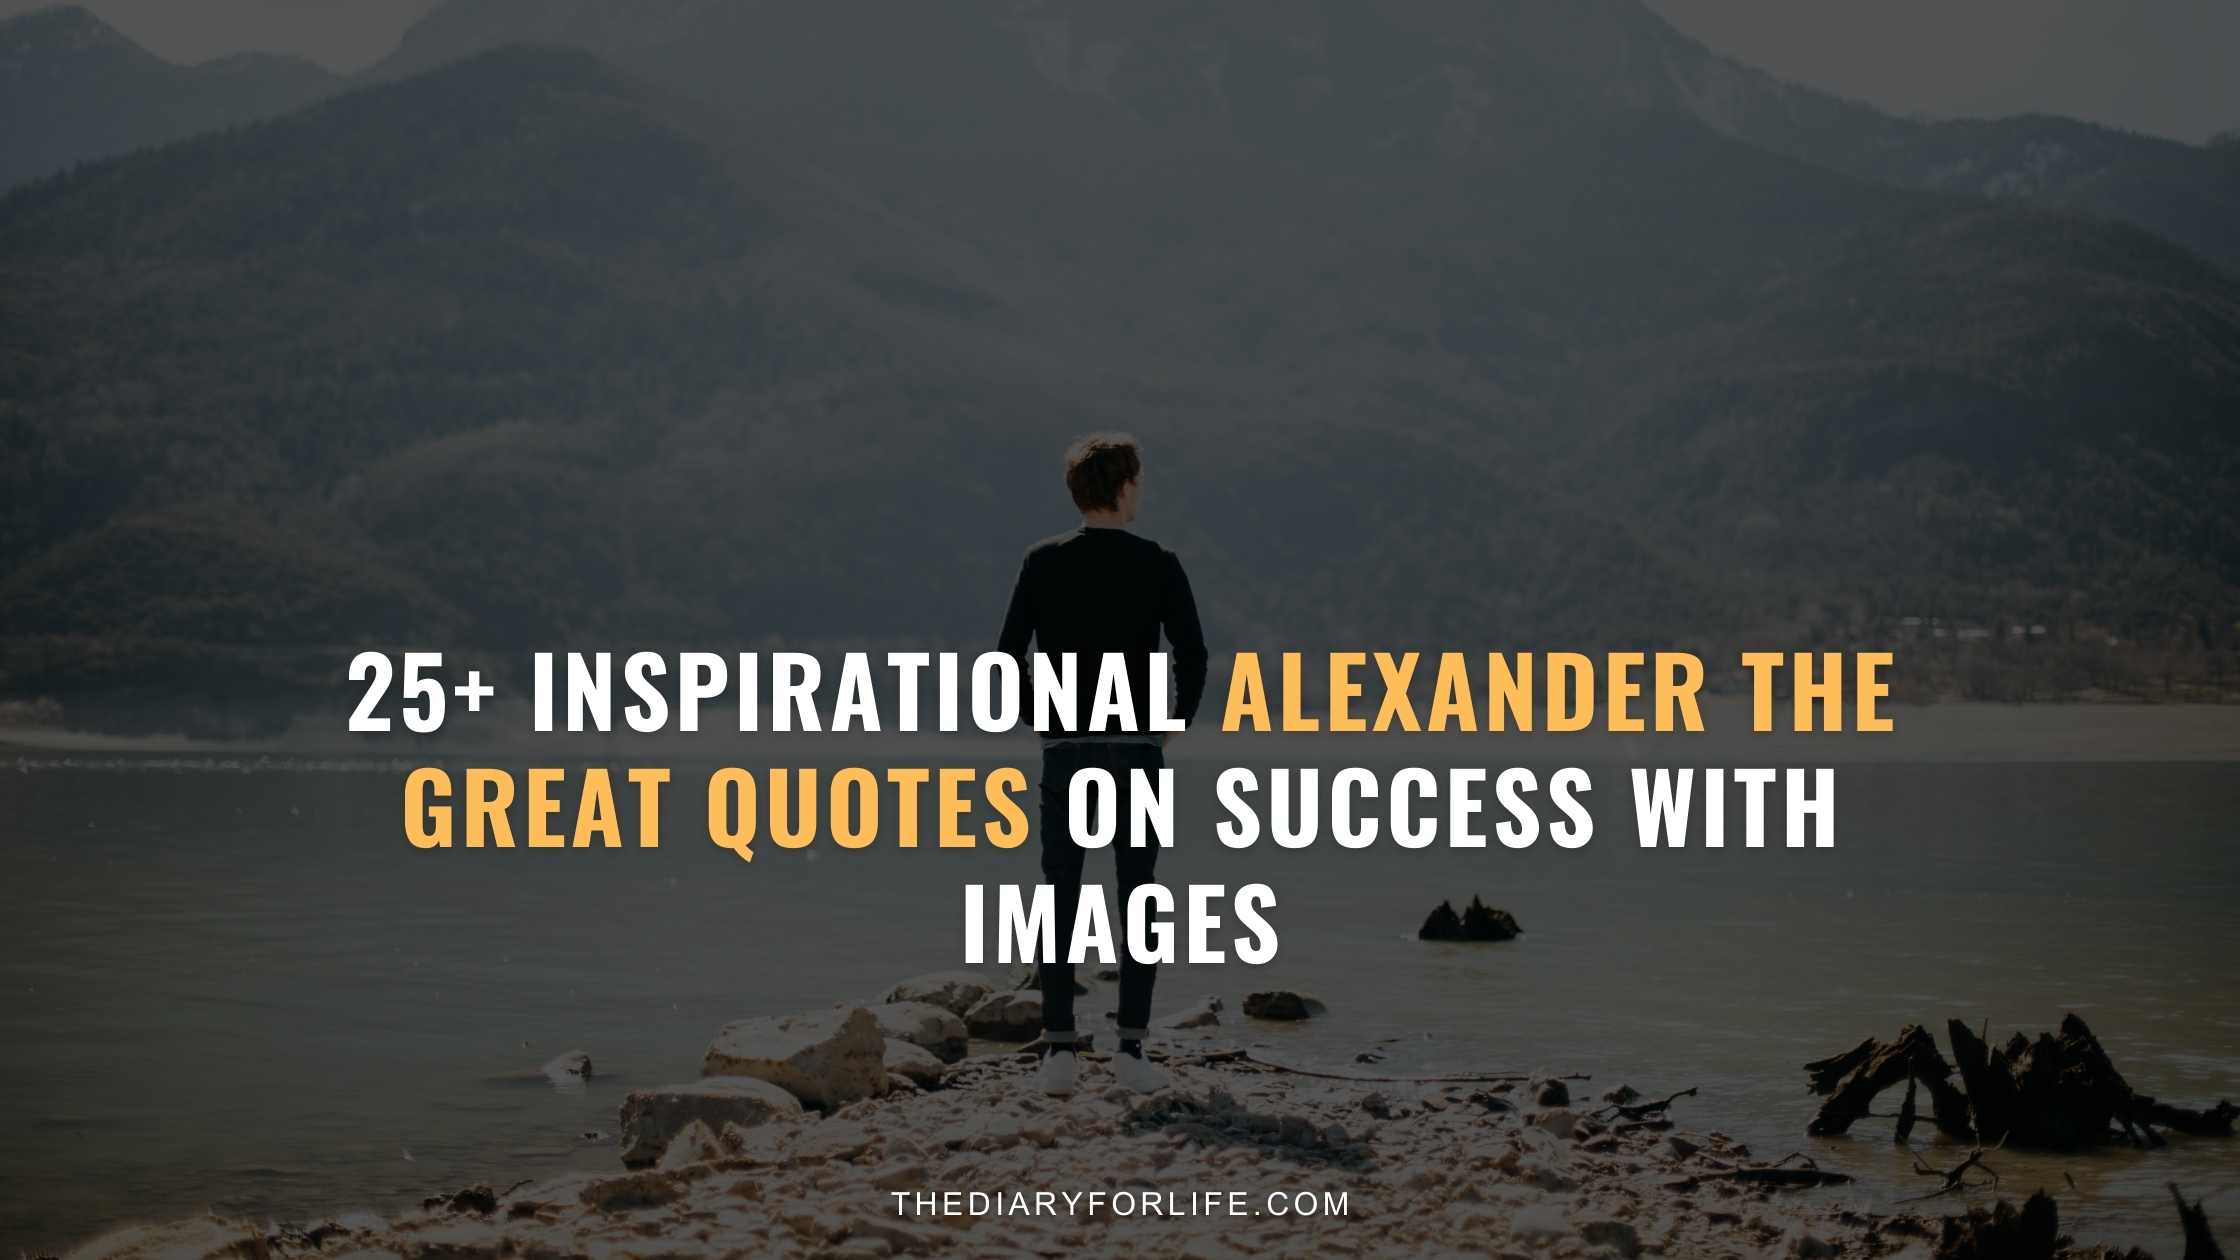 Alexander the Great quotes on success